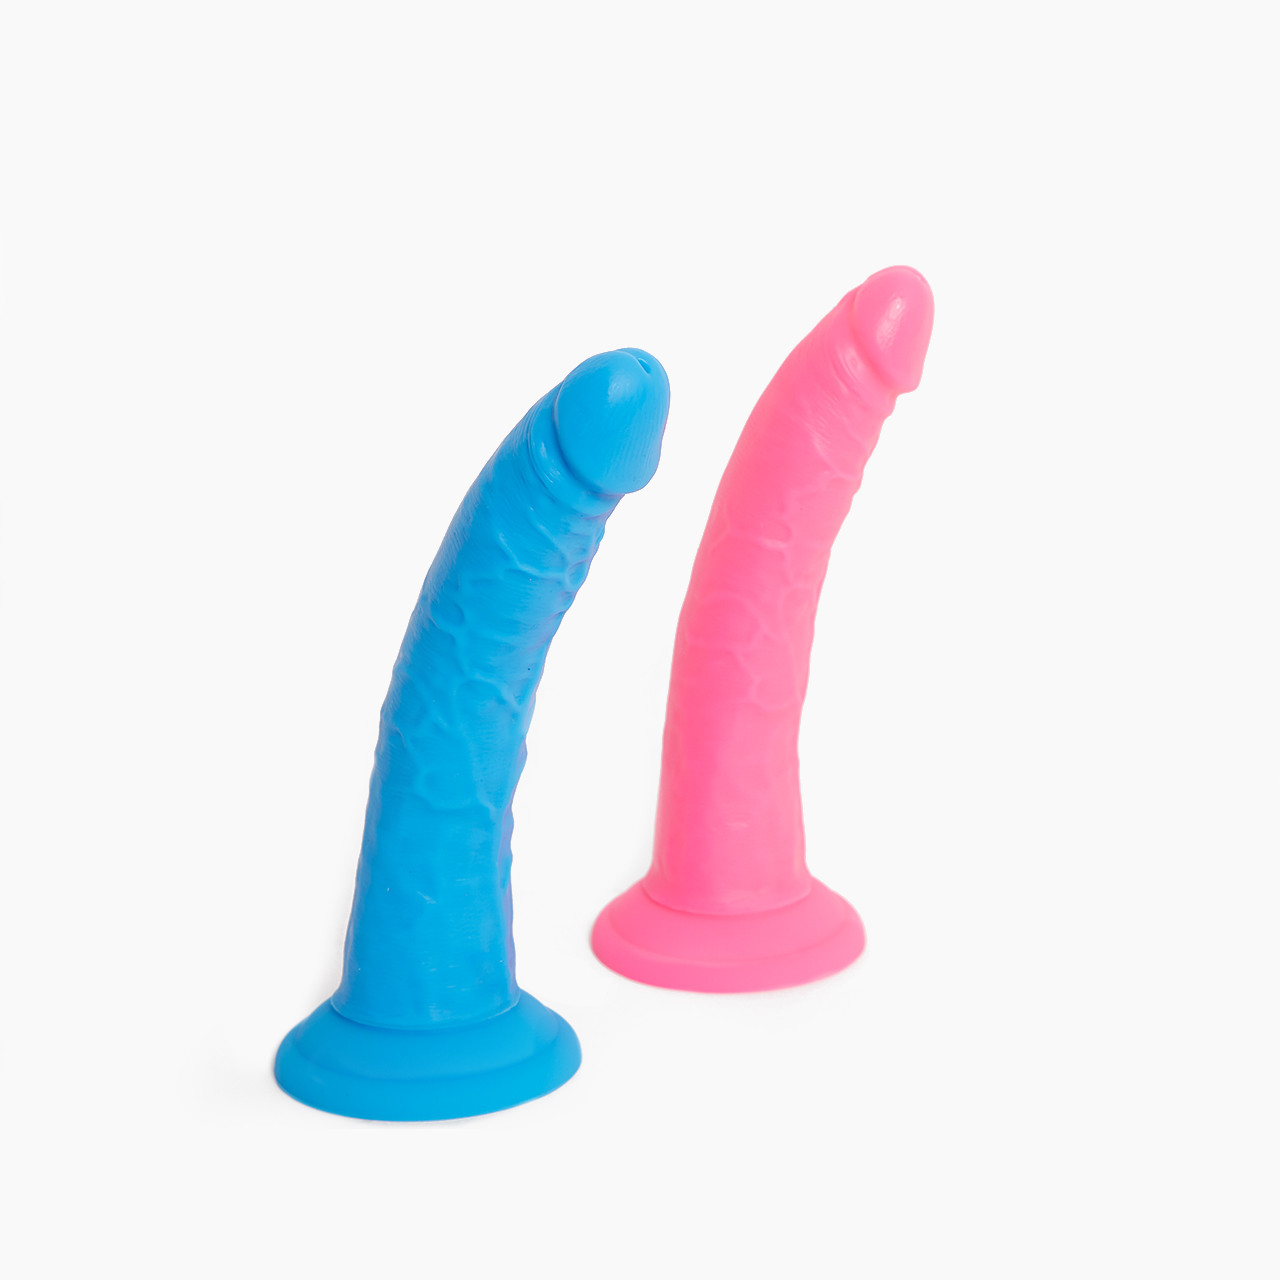 Neo Elite 7.5" Dildo blue and pink colors feels like a real penis